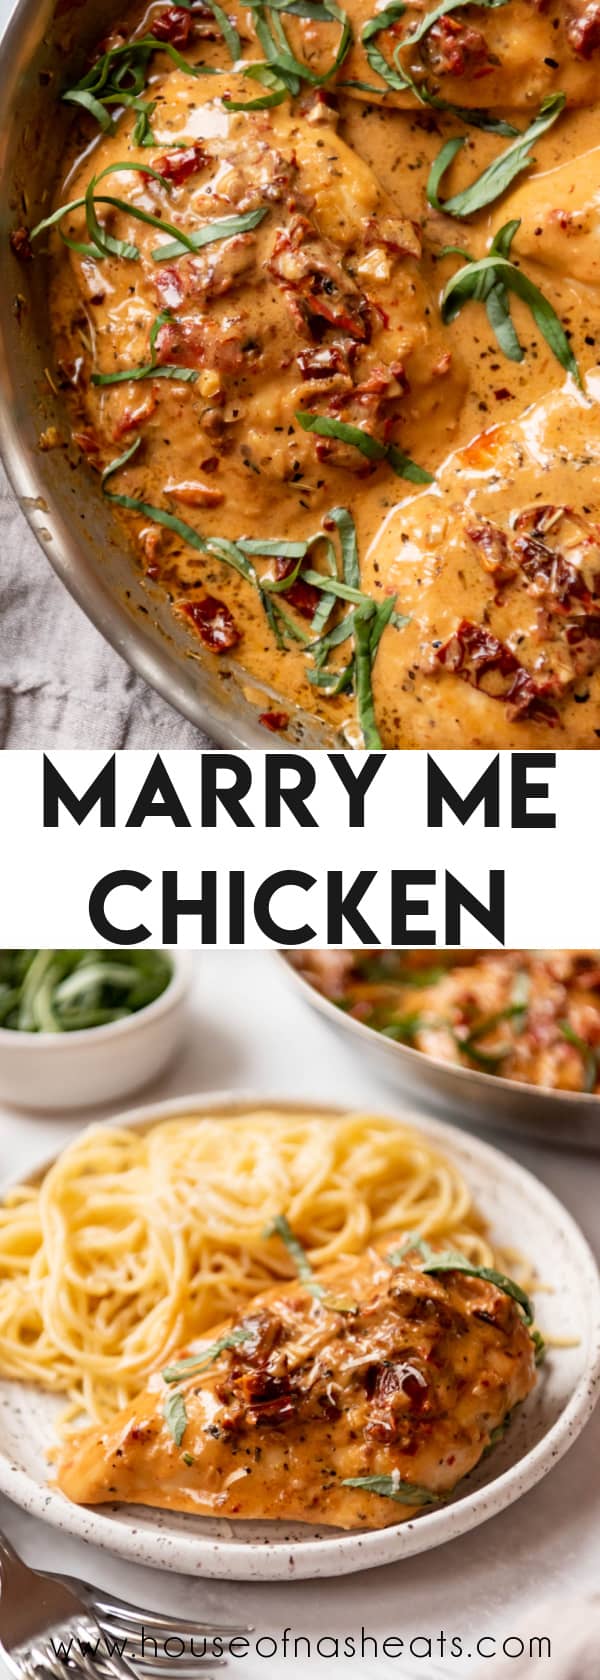 A collage of images of marry me chicken with text overlay.